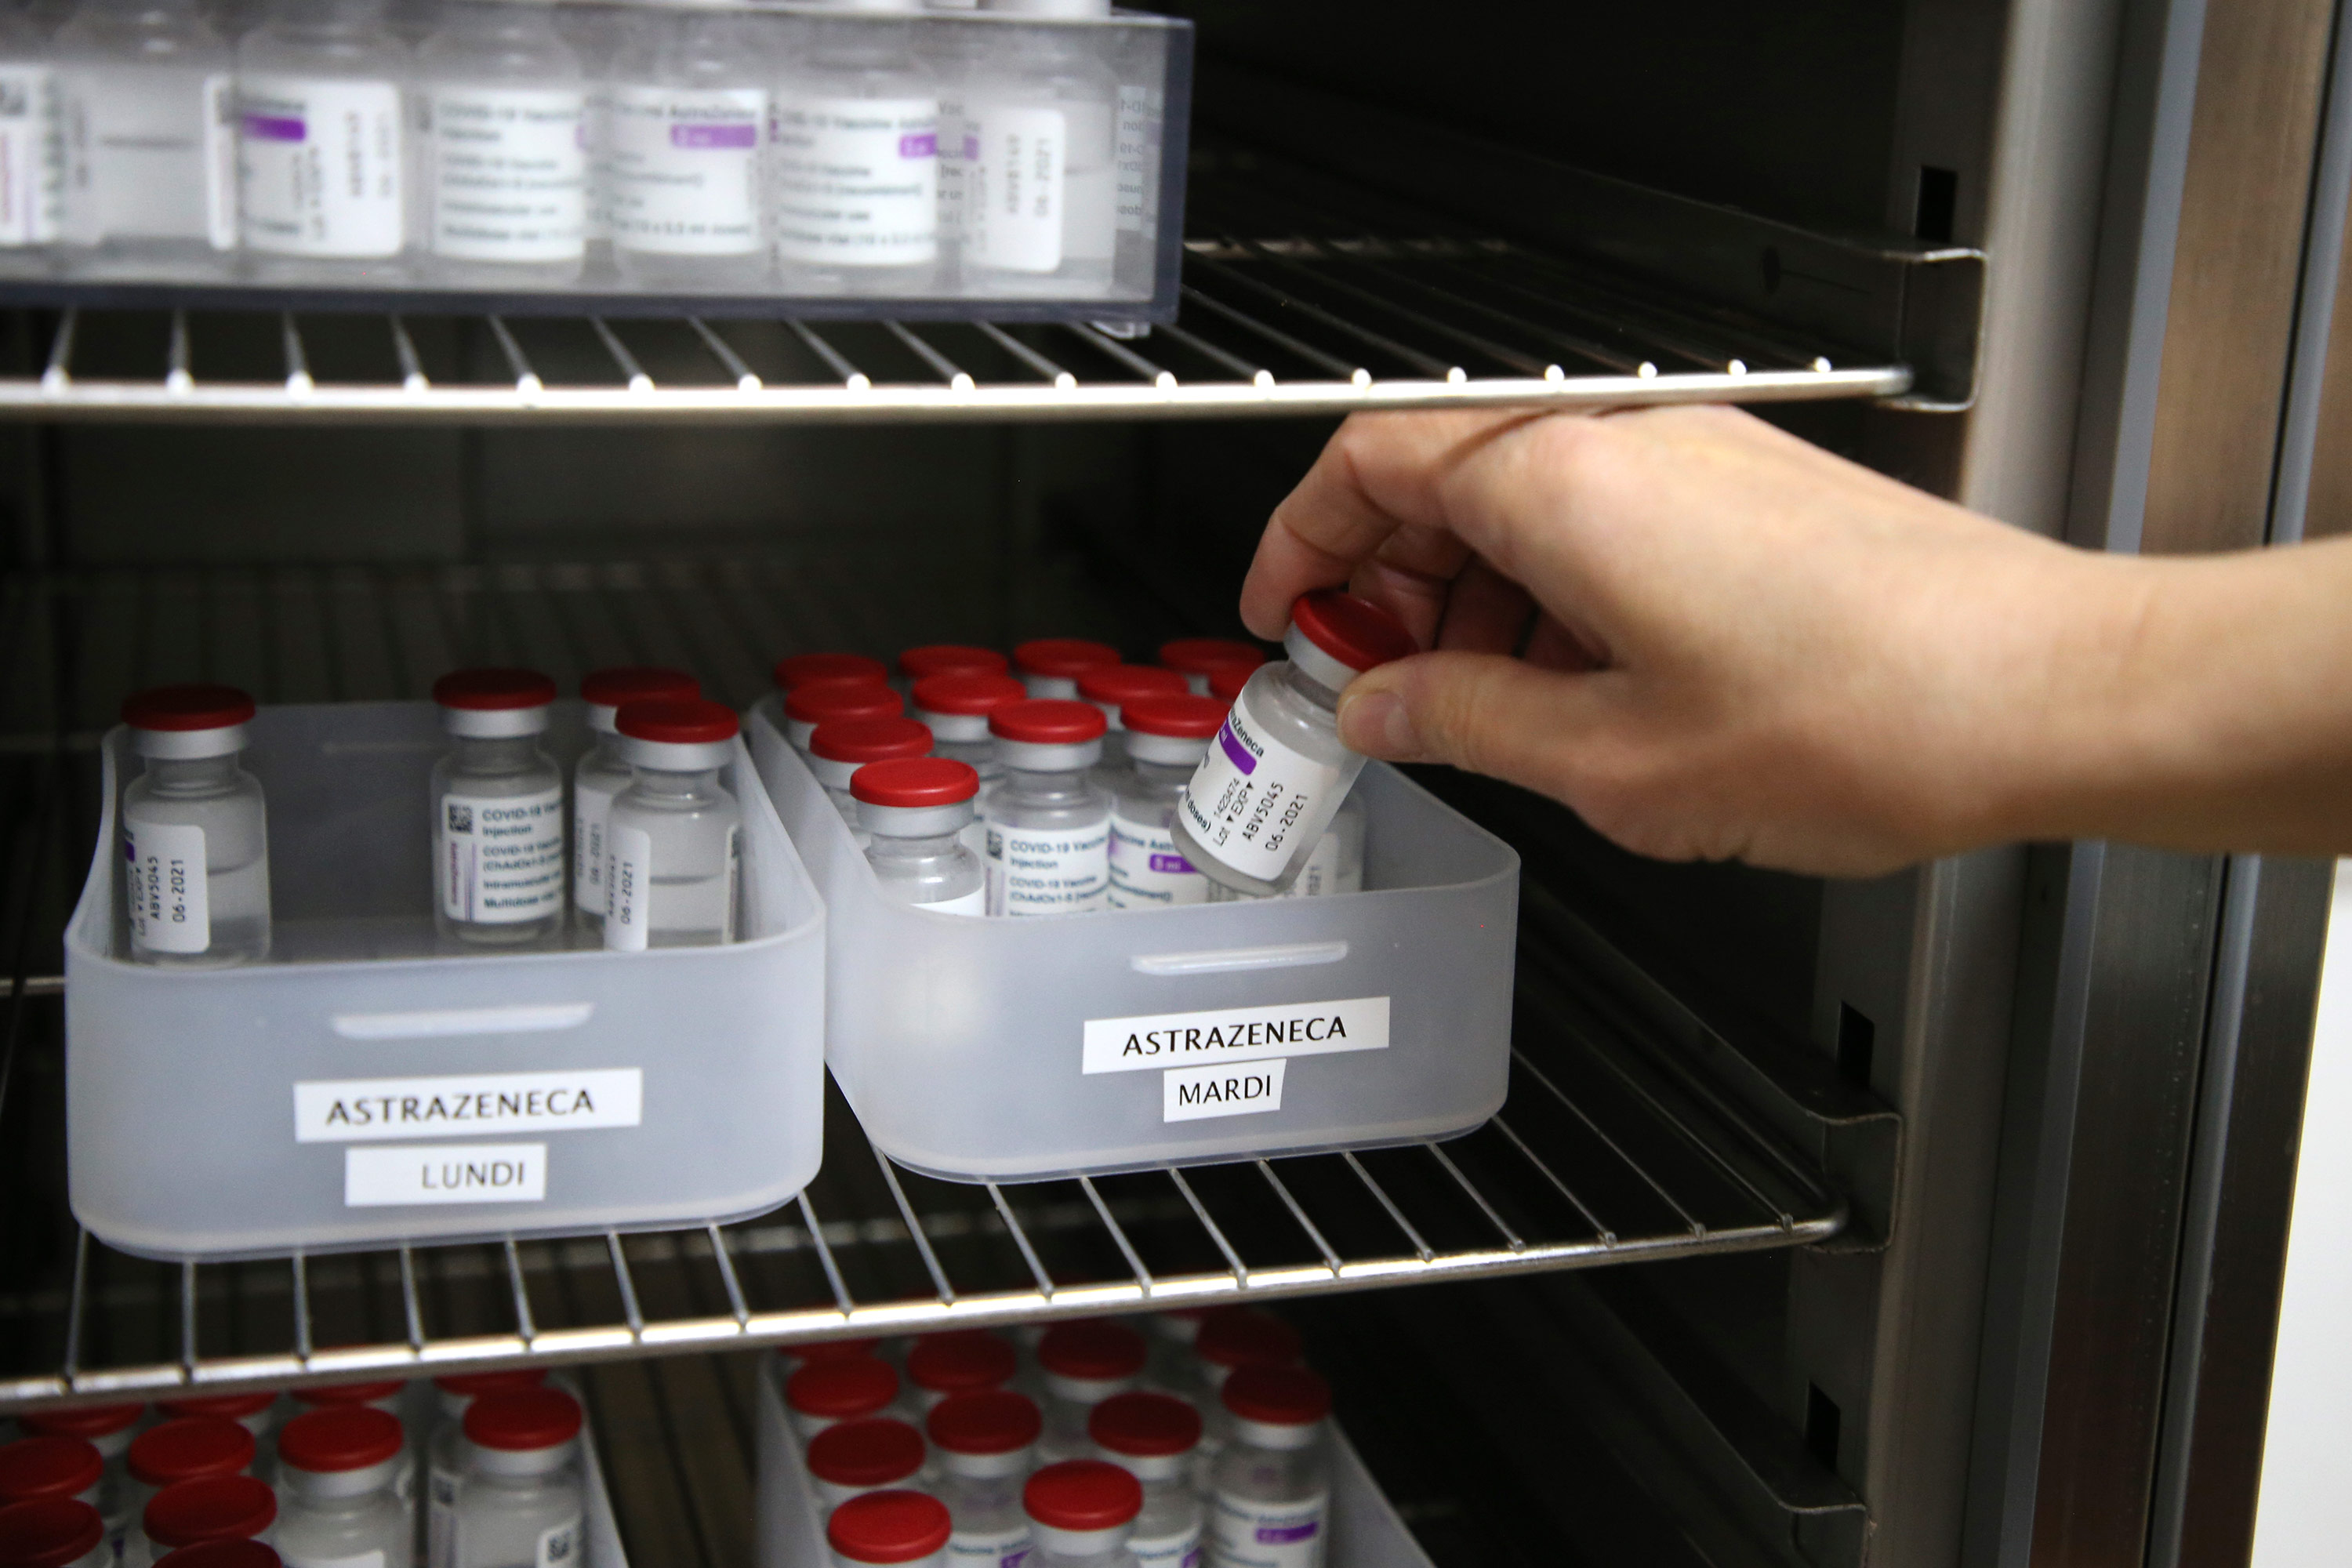 AstraZeneca Covid-19 vaccines are stored in a fridge at a vaccination center in Saint-Jean-de-Luz, France, on Tuesday, March 16. 